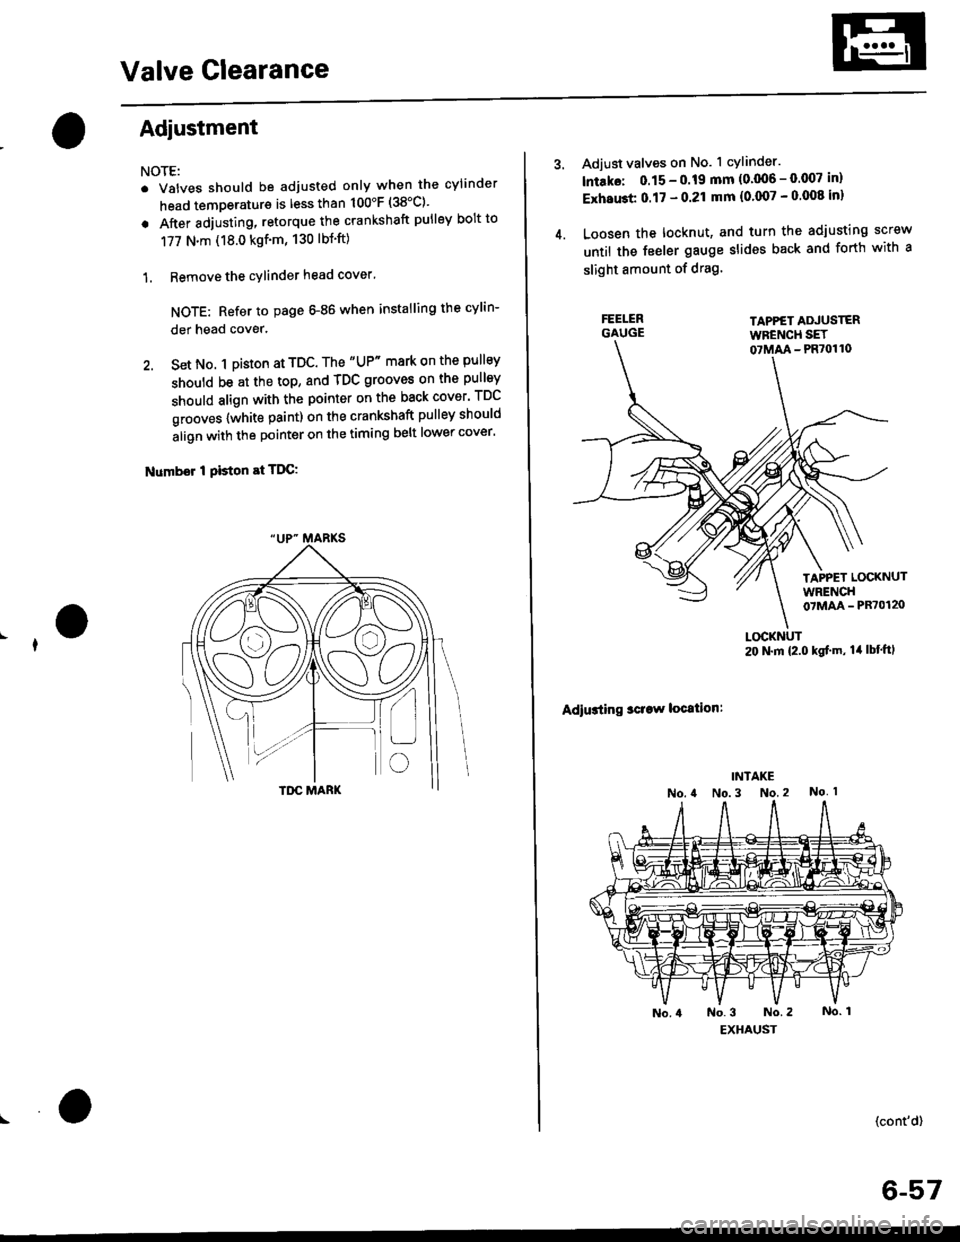 HONDA CIVIC 1999 6.G User Guide Valve Glearance
Adjustment
NOTE:
. Valves should be adjusted only when the cylinder
head temperaturs is less than 100F (38C)
. After adjusting, retorque the crankshaft pulley bolt to
177 N.m (18.0 